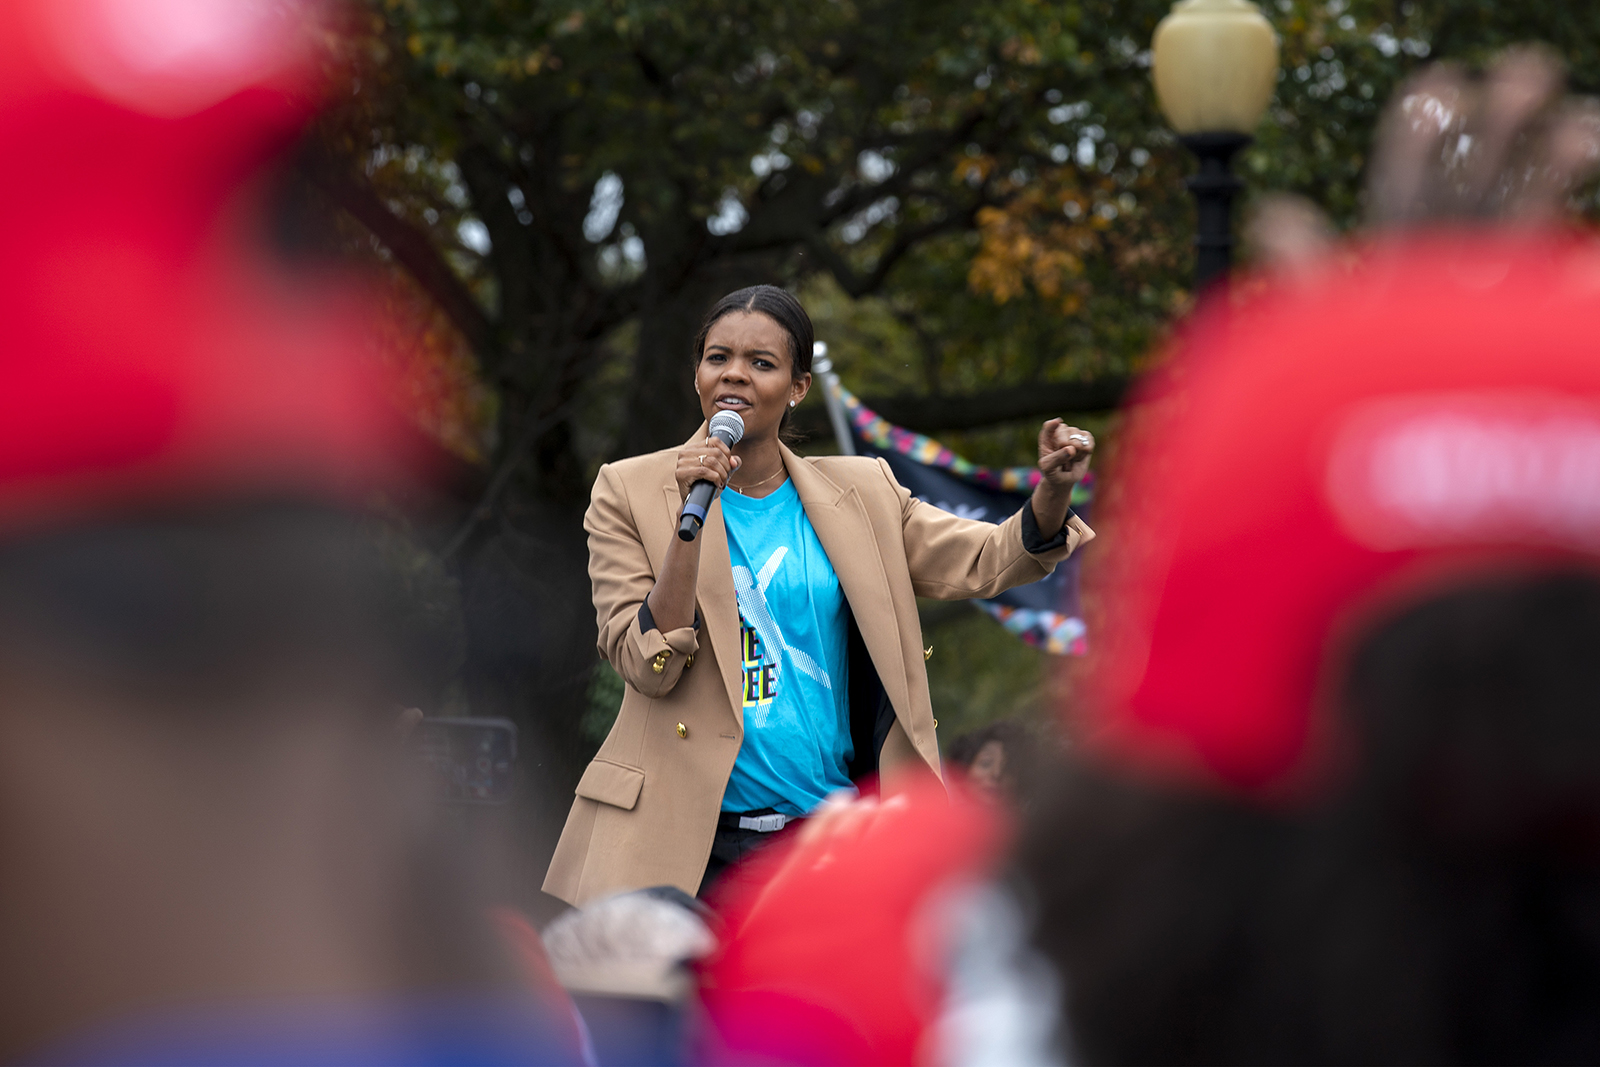 Conservative commentator and political activist Candace Owens speaks during a meeting on The Ellipse at the White House on Saturday, October 10, 2020, in Washington.  (AP Photo/Jose Luis Magana)